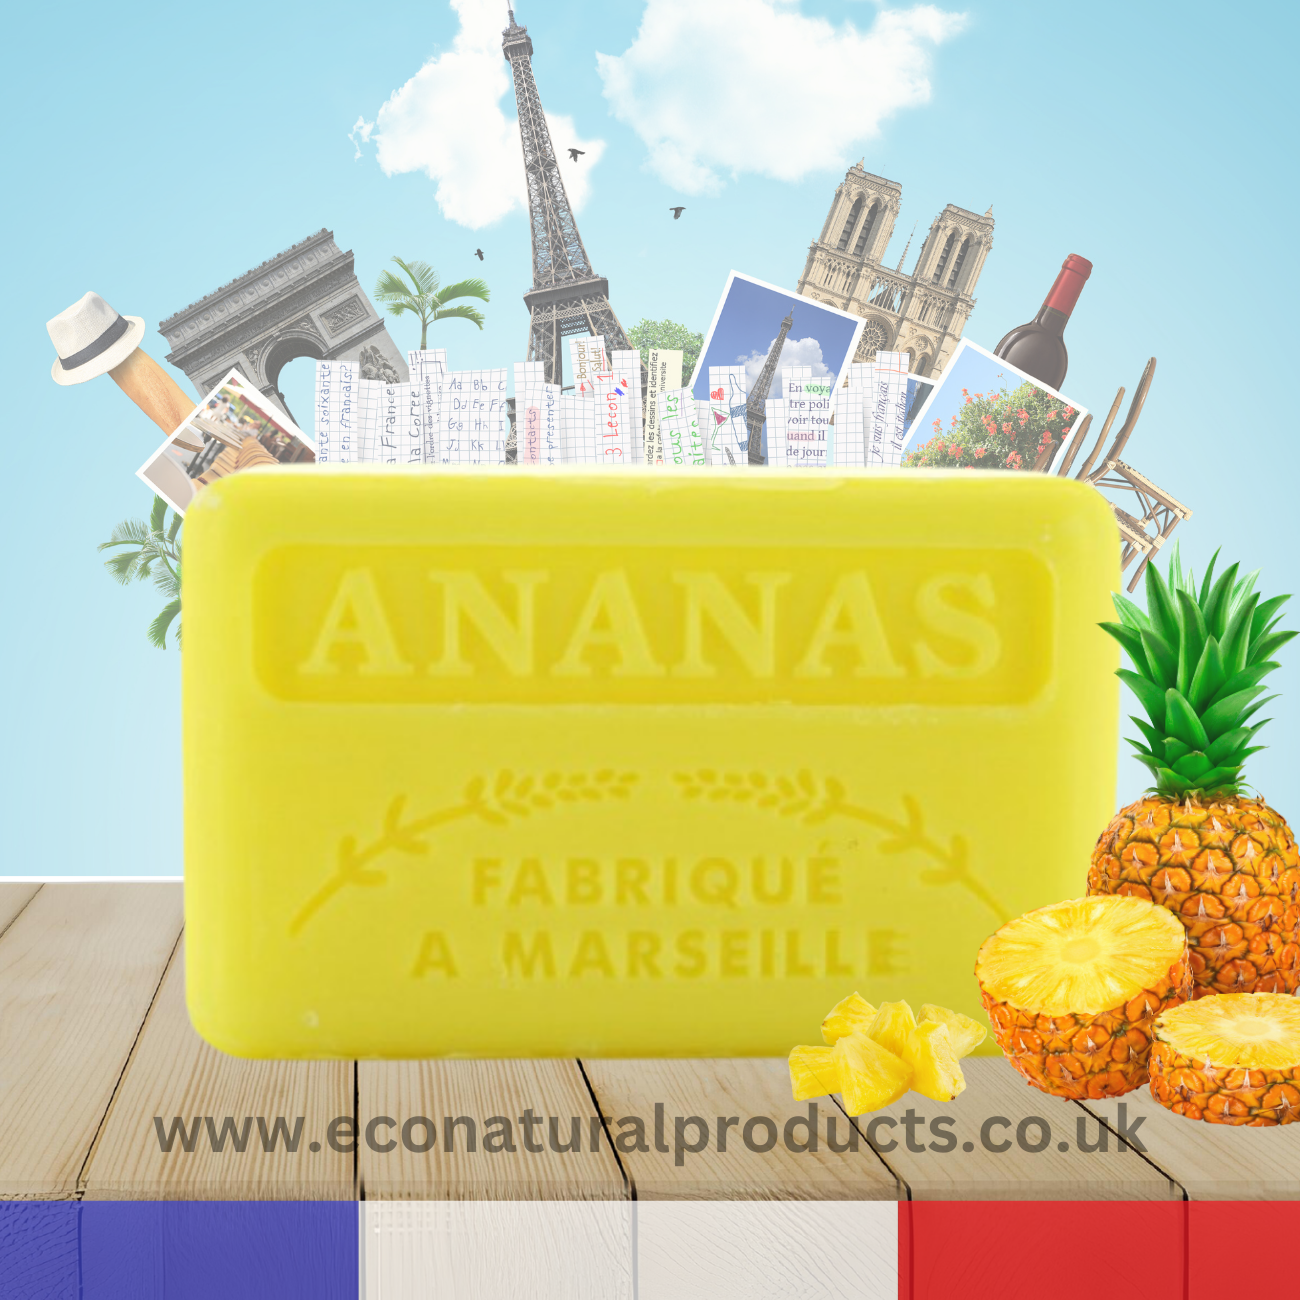 French Marseille Soap Ananas (Pineapple) 125g